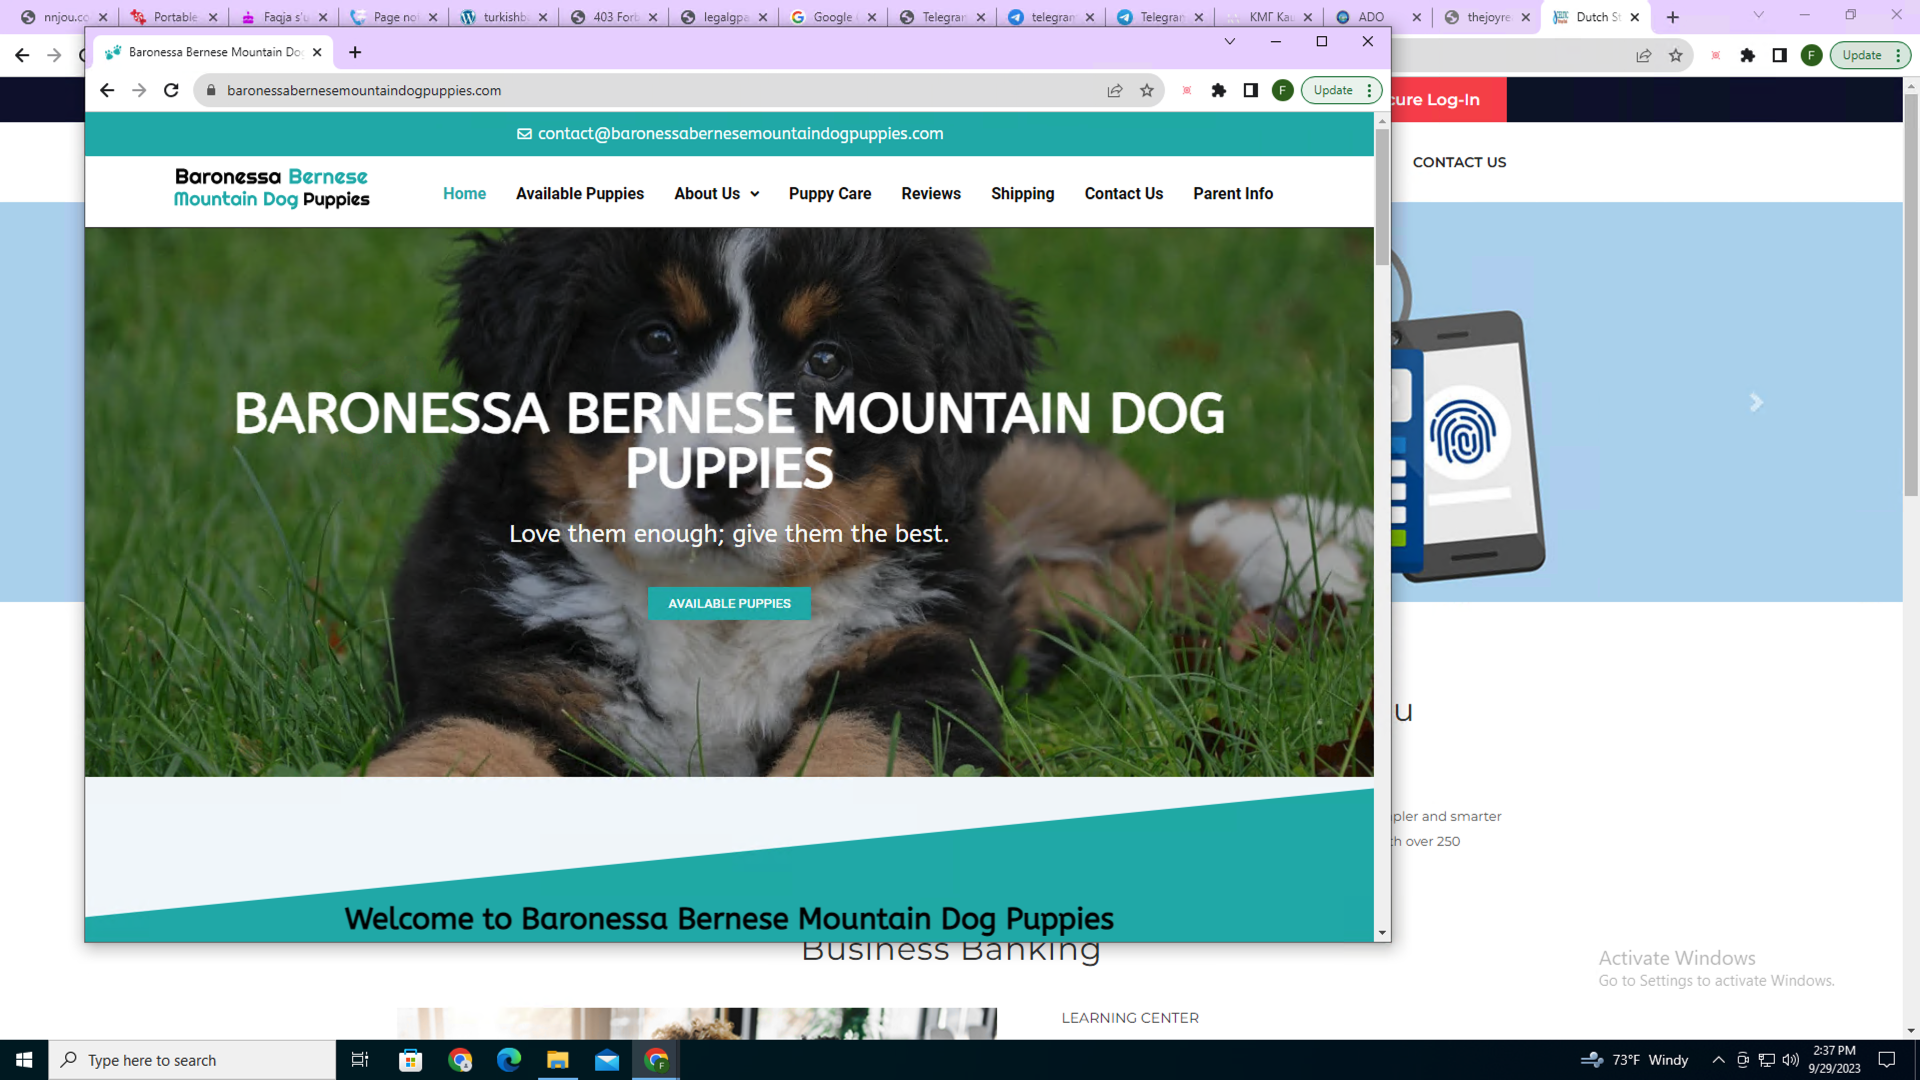 Image 1 is a screenshot of the website for the Baronessa Bernese Mountain Dog Puppies. There is an image of a Bernese Mountain dog puppy. There's a button to view available puppies. The menu options include available puppies, about us, puppy care, reviews, and more.